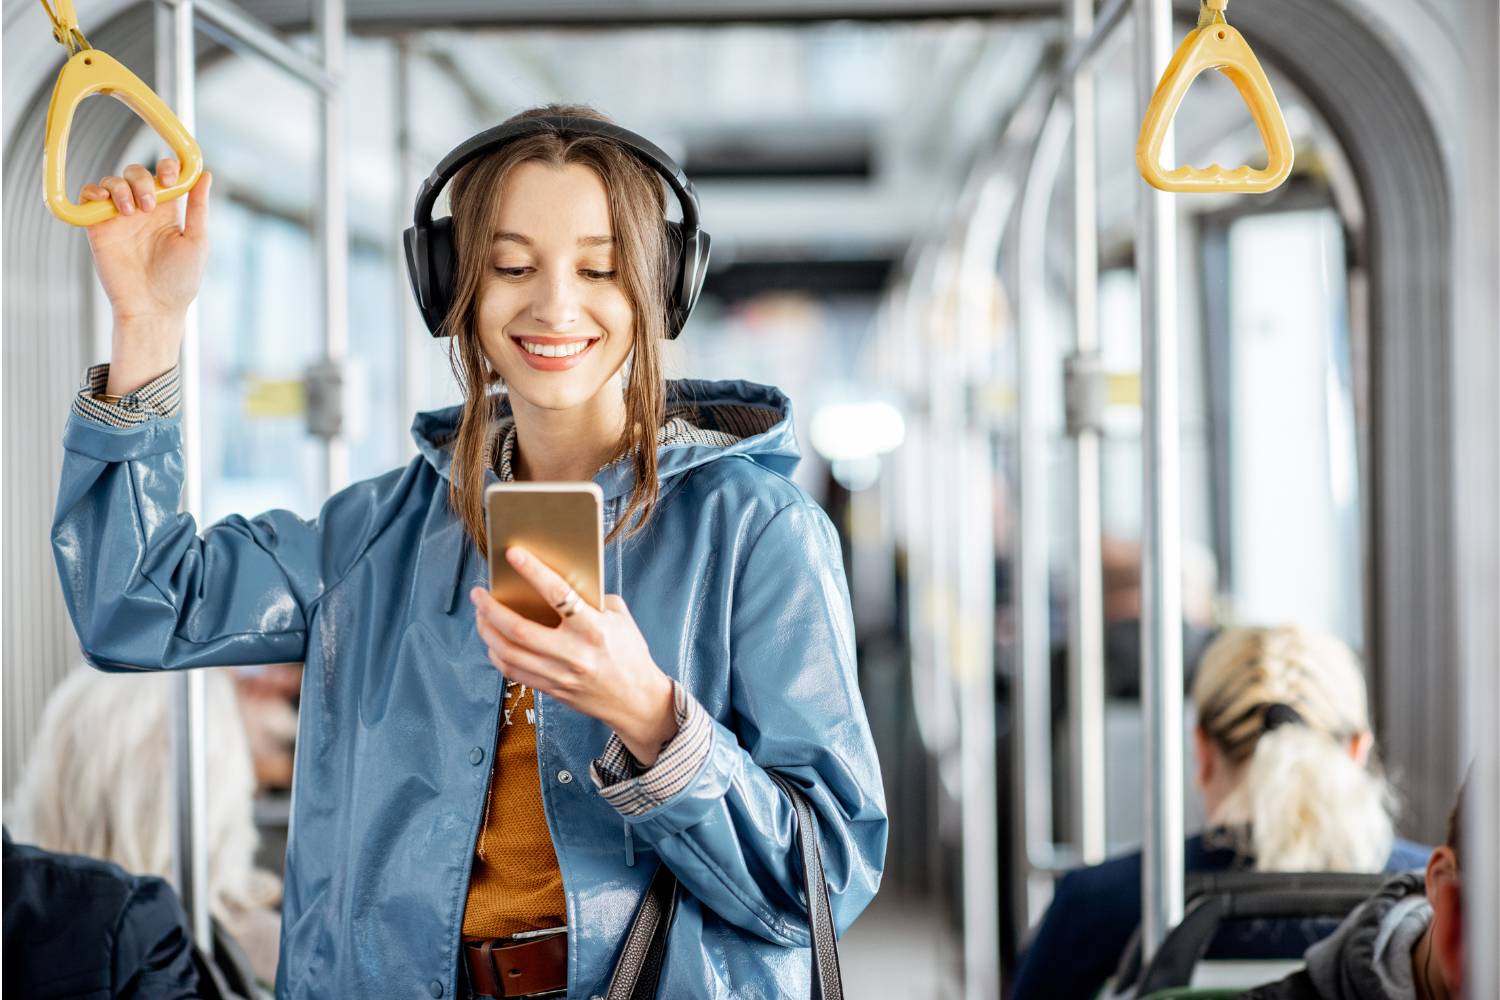 Young woman wearing headphones holds a handle while riding the bus. She smiles as she looks at her mobile phone.